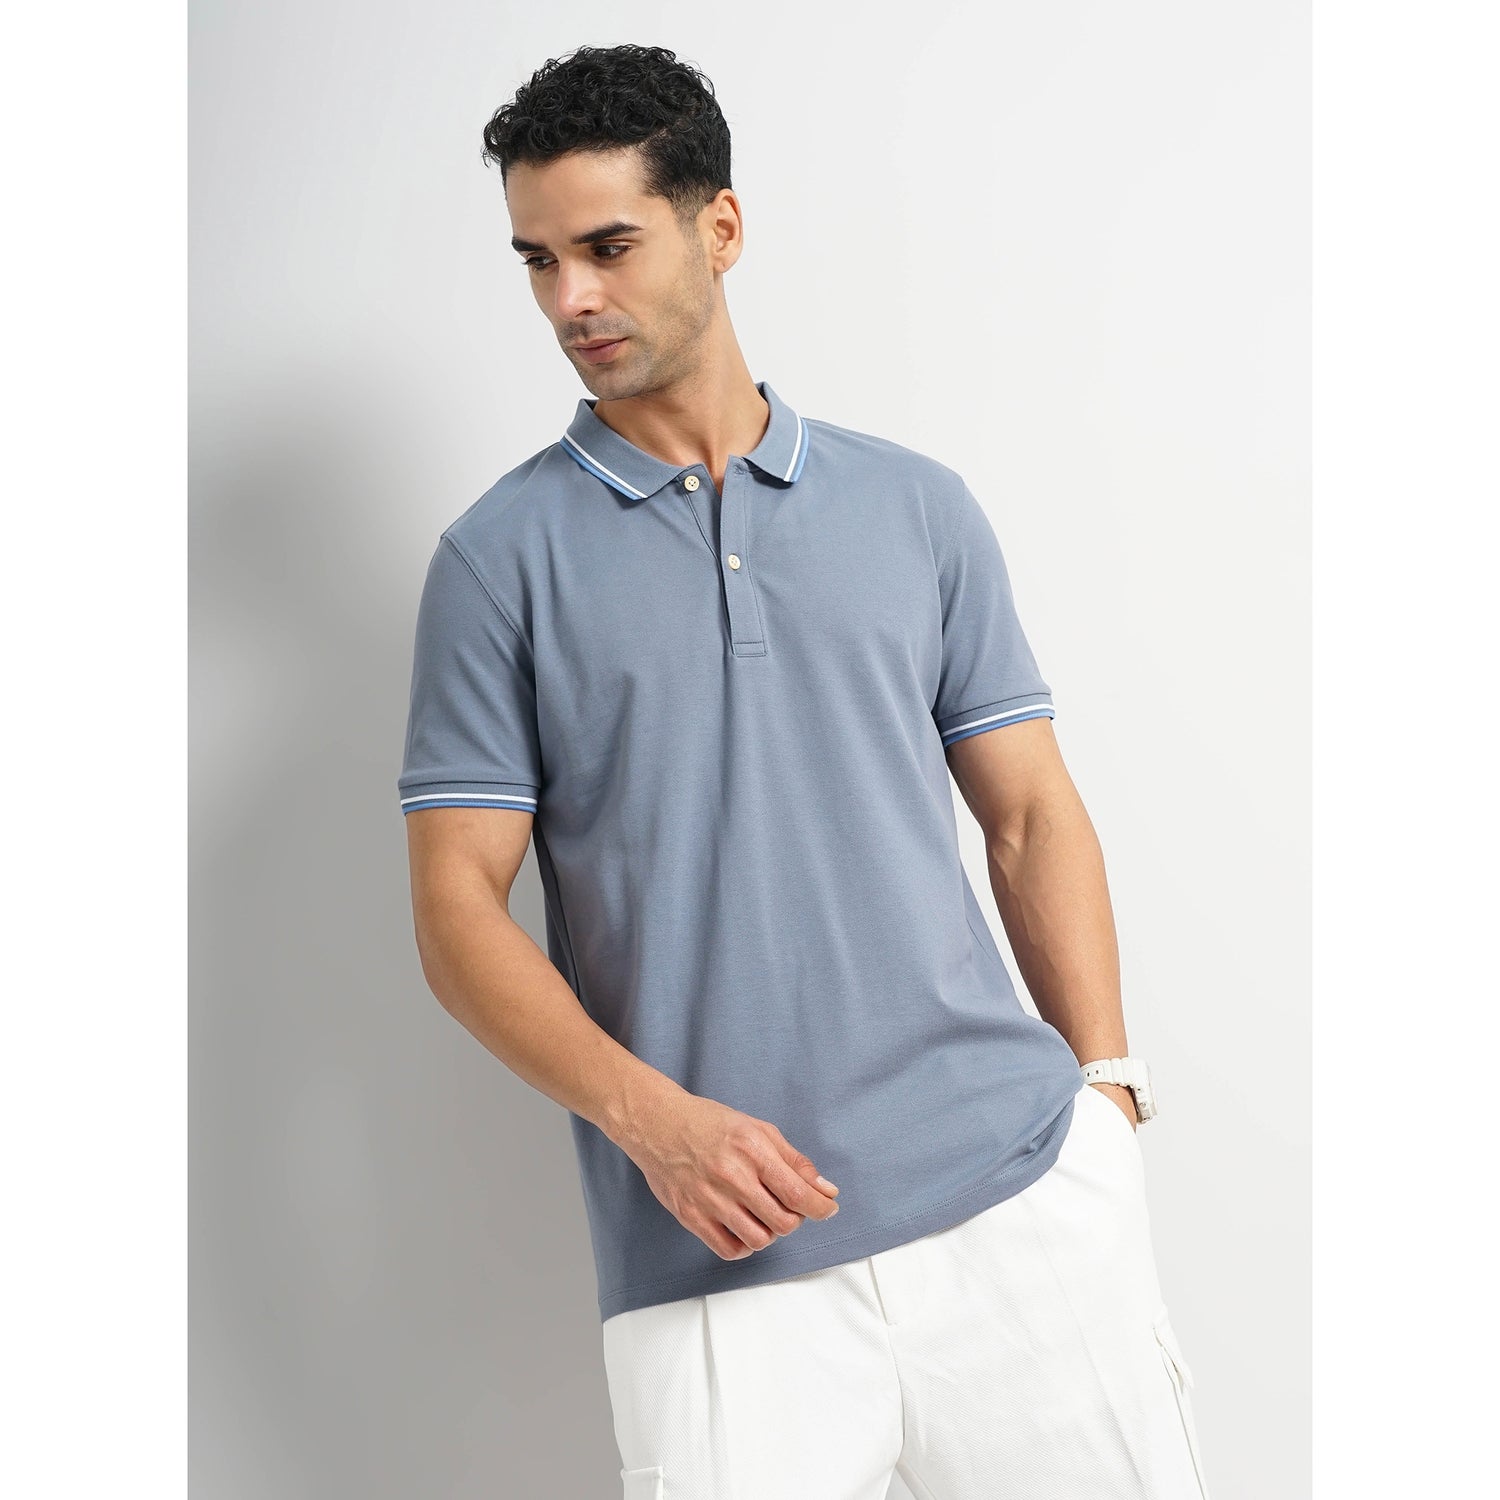 Men's Blue Solid Slim Fit Cotton Polo with Tipping Tshirts (DECOLRAYEB3)